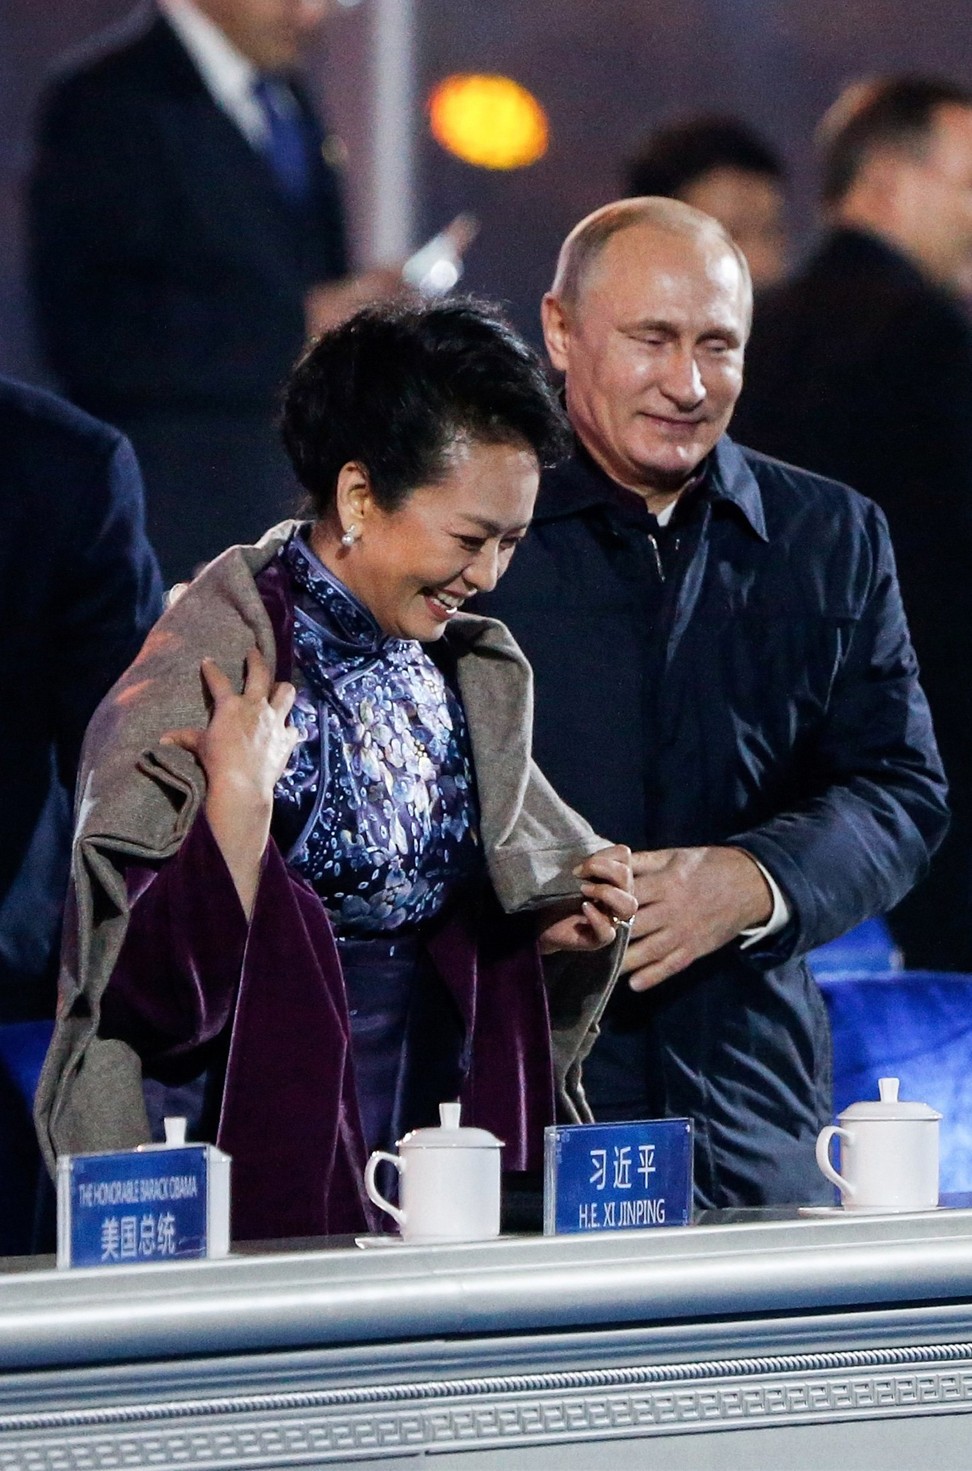 Russia’s President Vladimir Putin (right) helps put a shawl on Peng Liyuan, wife of China’s President Xi Jinping, as they watch a lights and fireworks at the opening of the Apec summit at a Beijing stadium in November 2014. Photo: Reuters